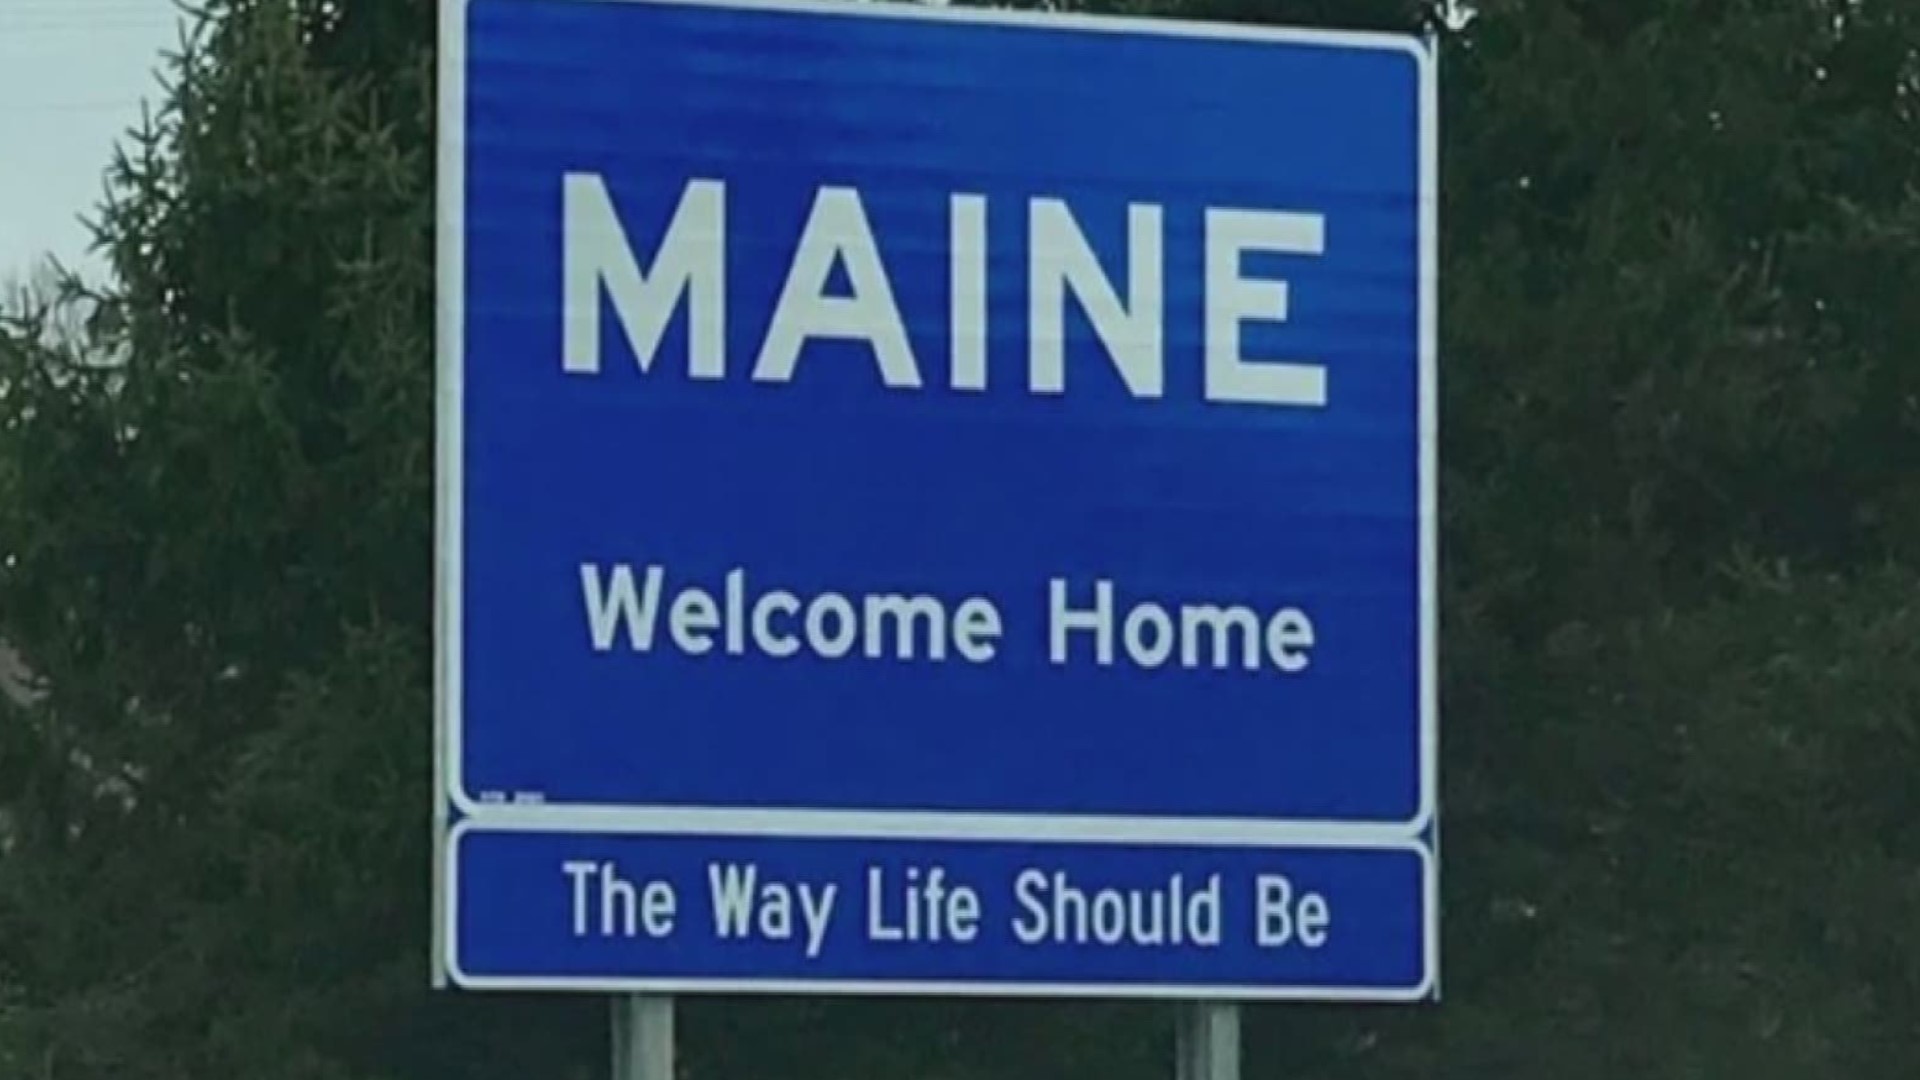 "The Way Life Should Be" slogan returns to Kittery sign